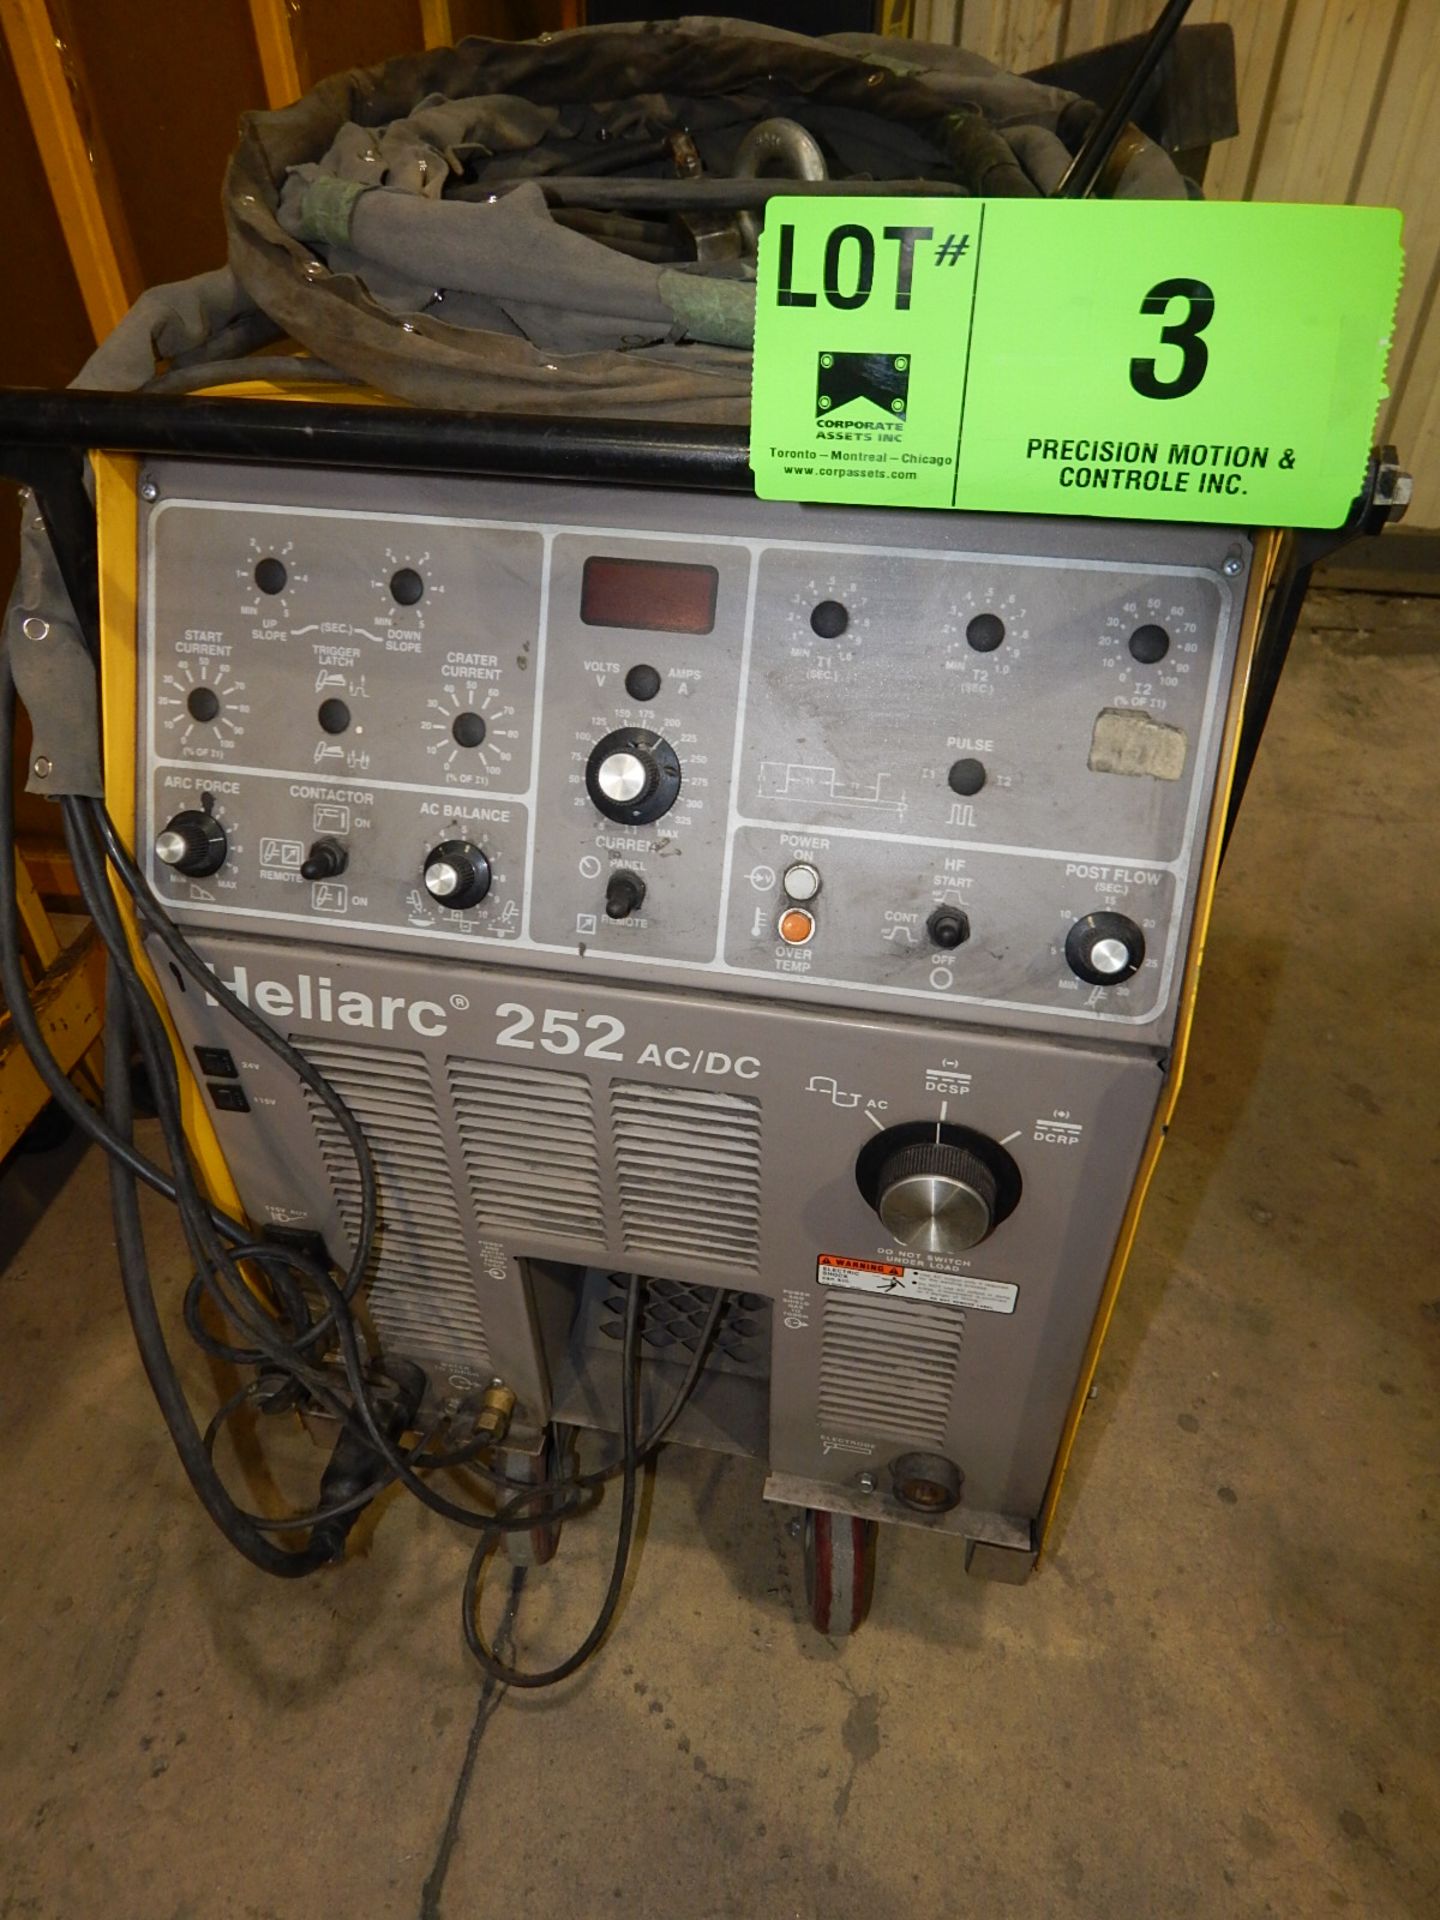 ESAB HELIARC 252 AC/DC ARC WELDER WITH COOLANT, CABLES AND GUN, S/N: TL-J209001 - Image 2 of 4